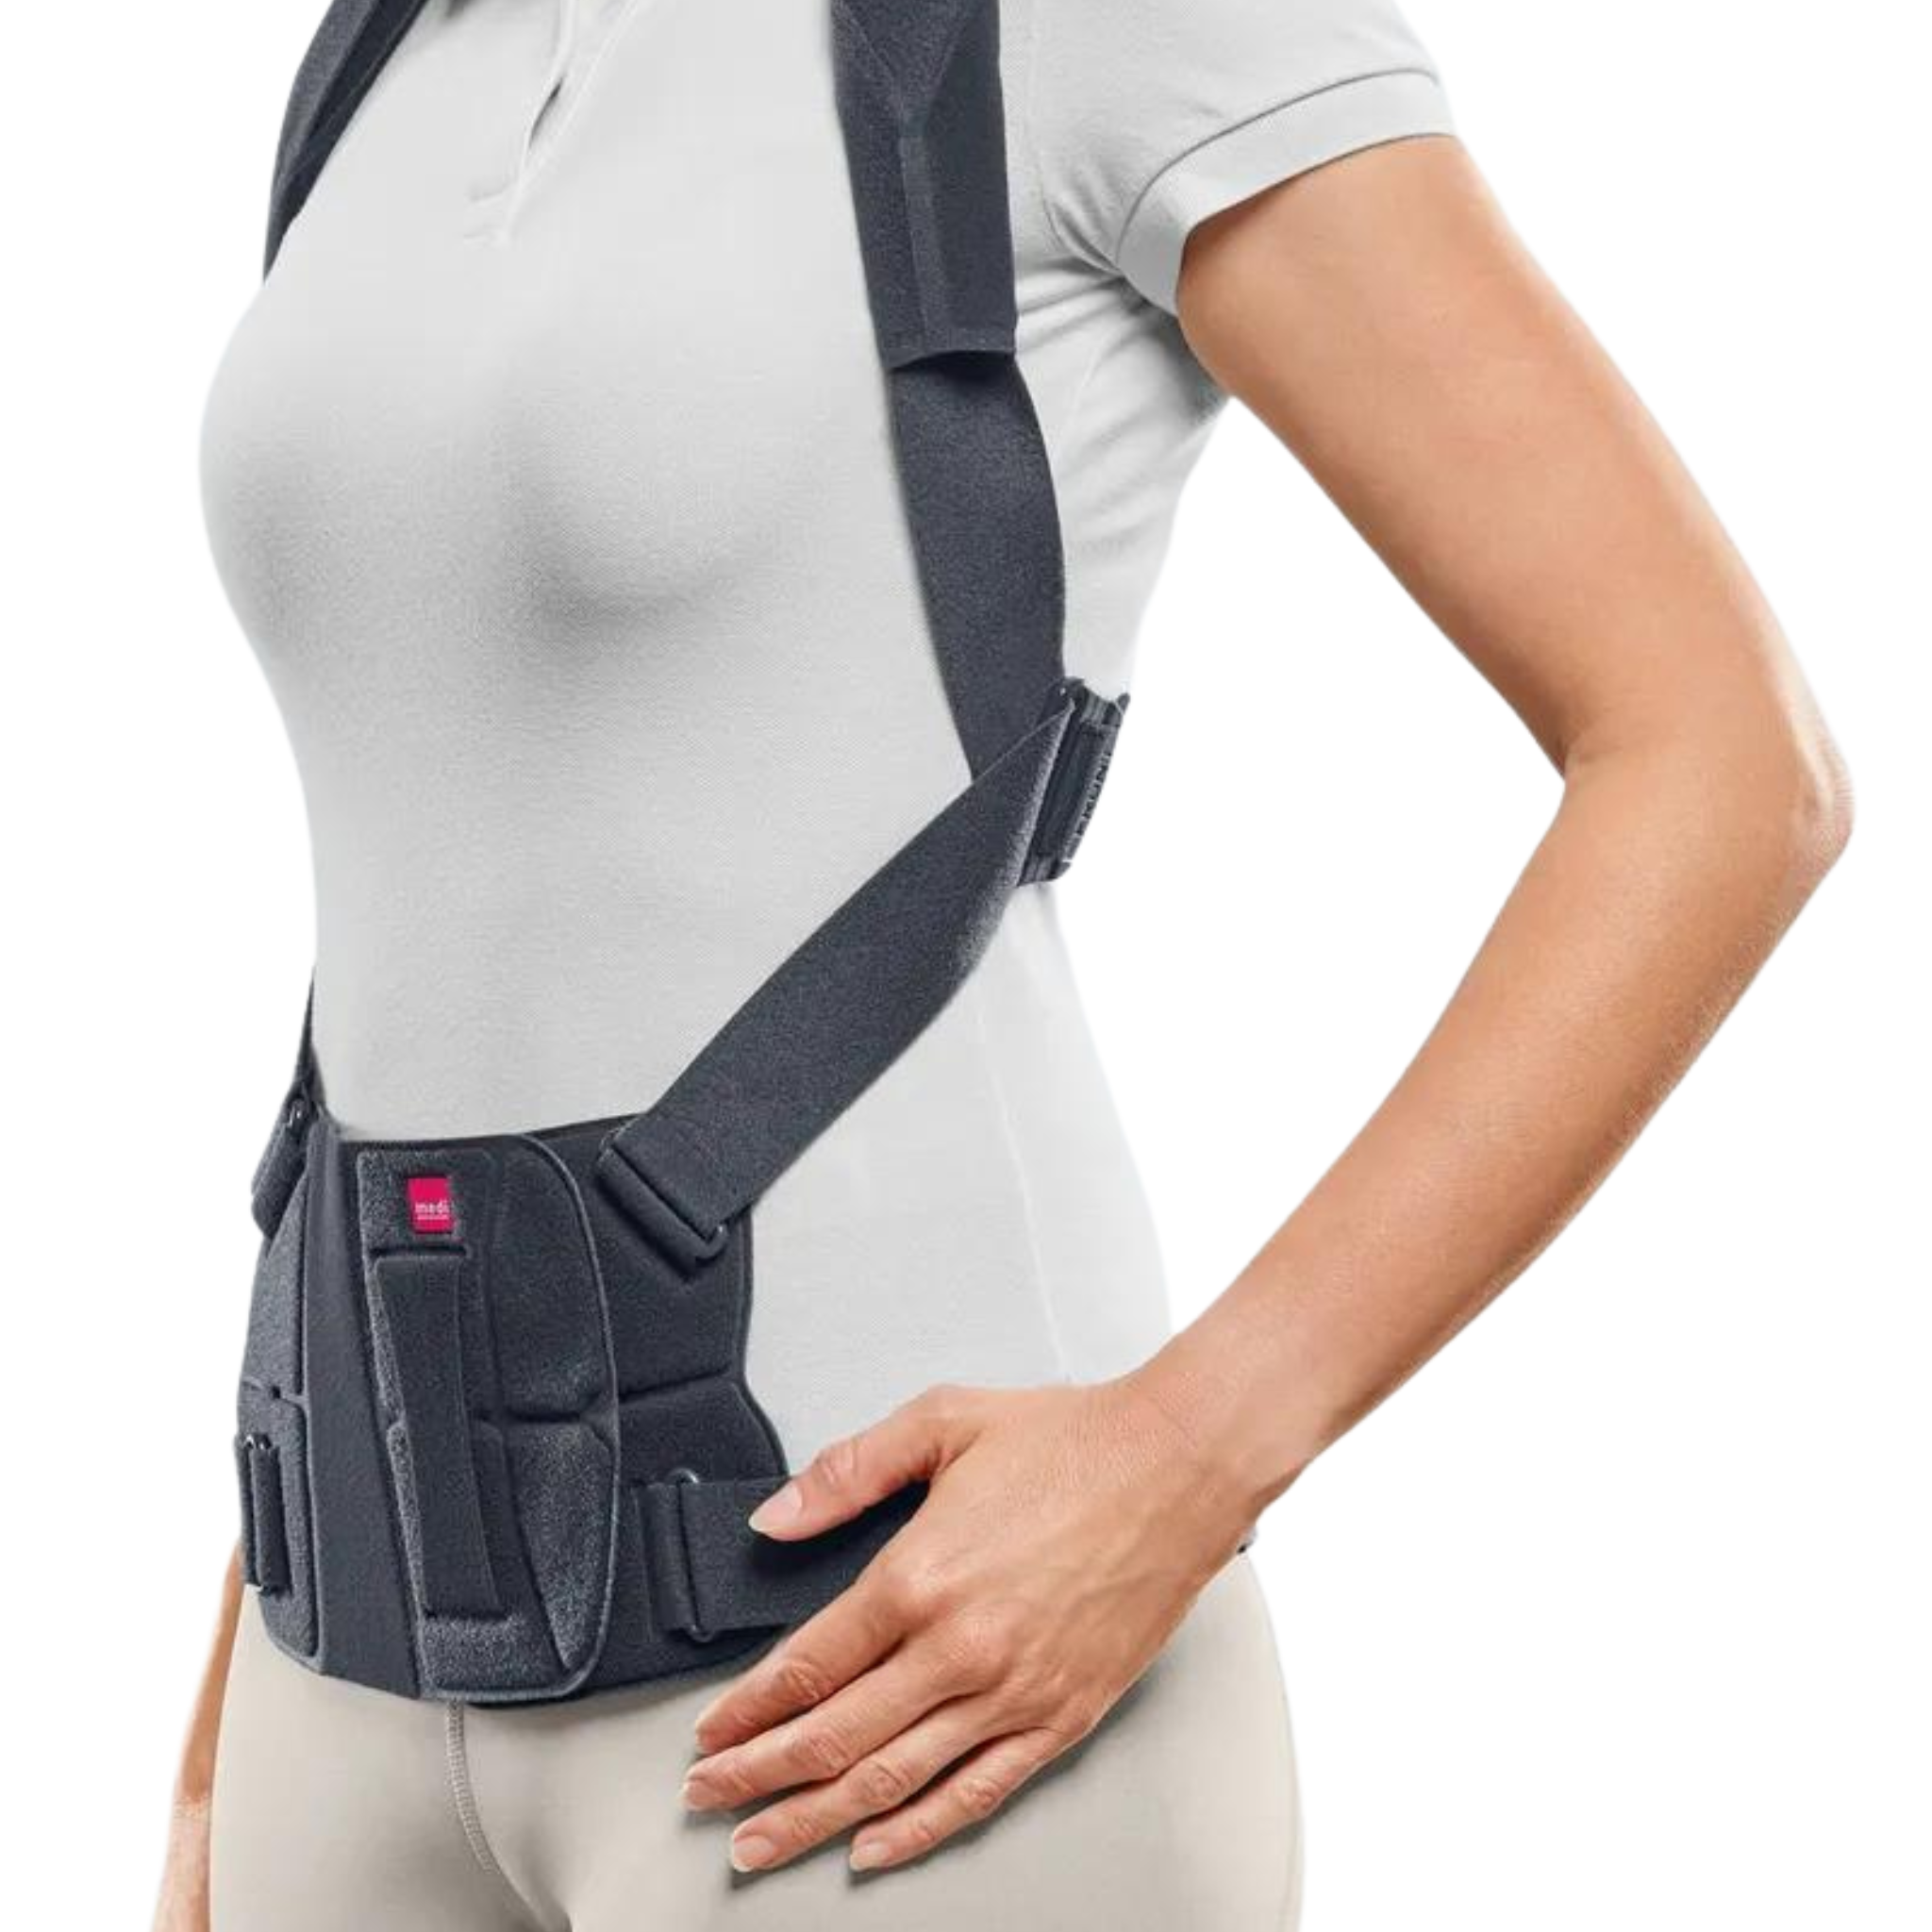 Back Orthosis | Spinomed®2